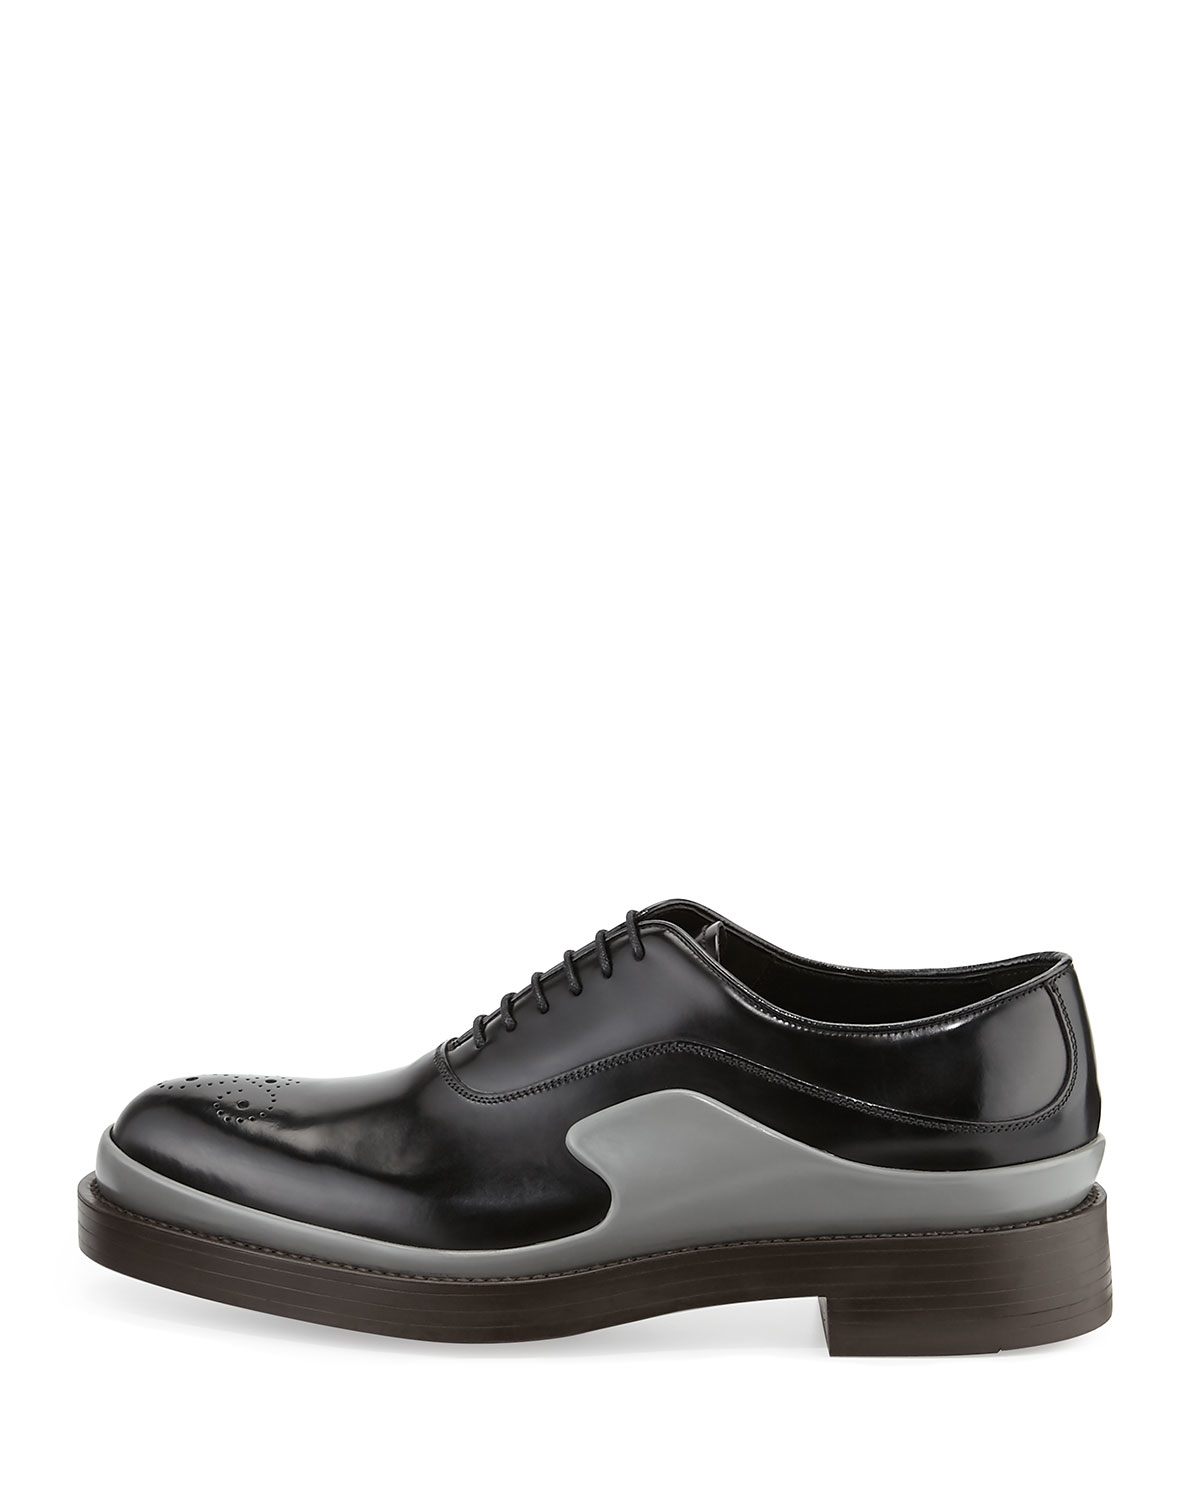 Prada Runway Two-Toned Leather Derby Shoes in Black | Lyst